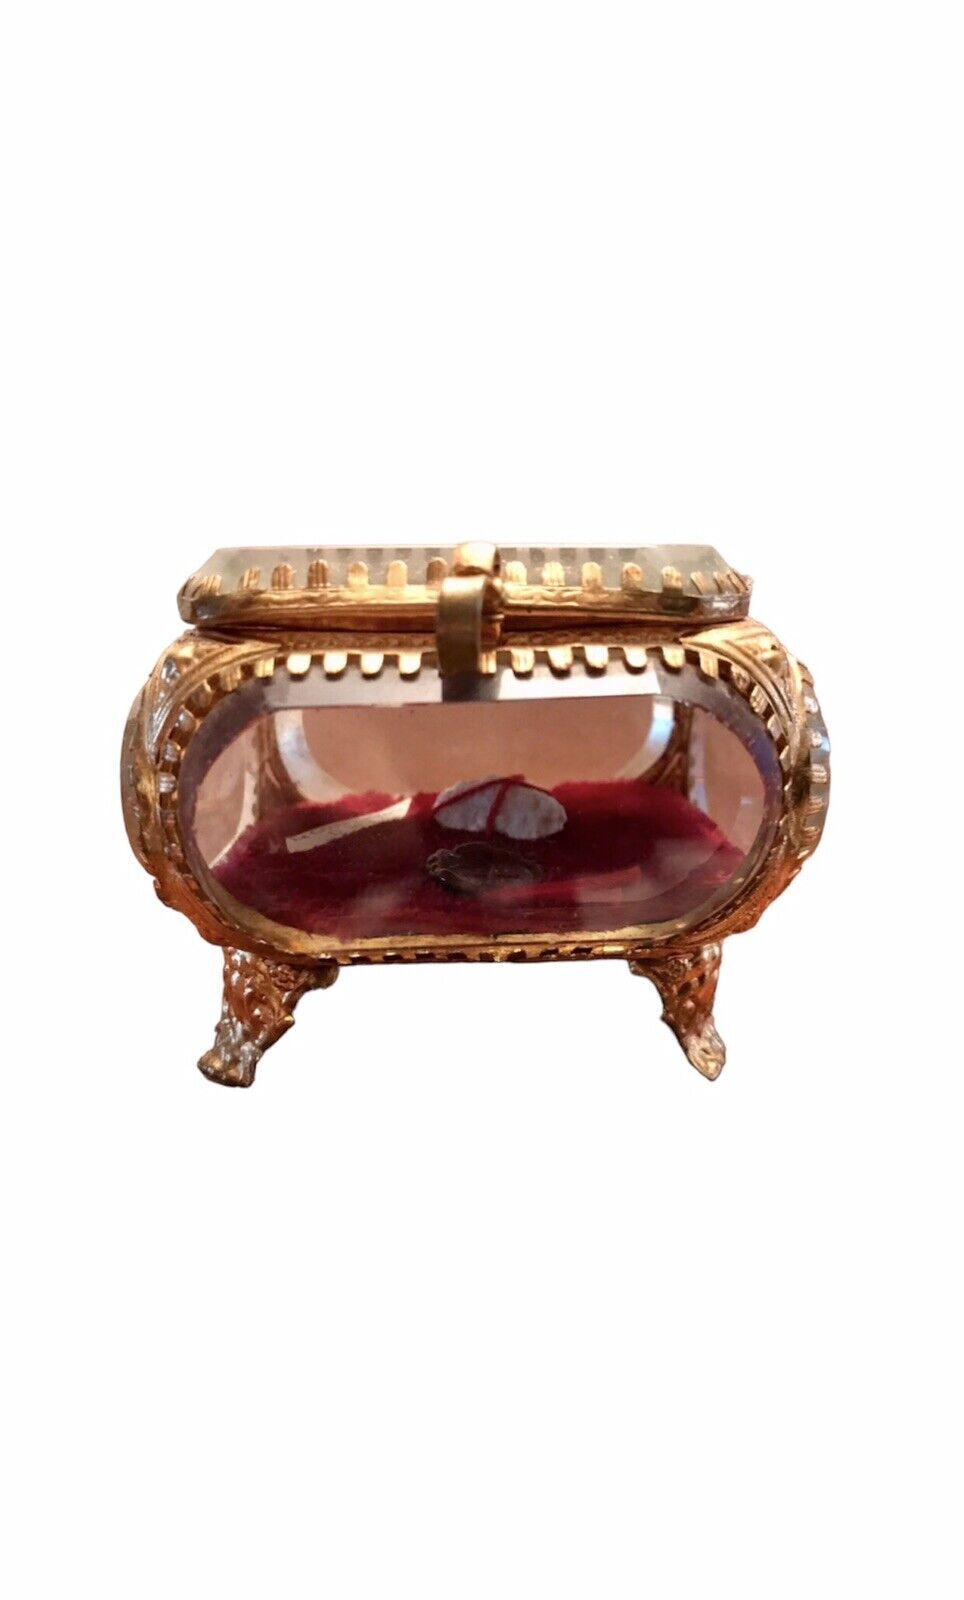 Antique French Ormolu Casket Relic Stone from Cave Jesus’ Birth. Red Wax Seal